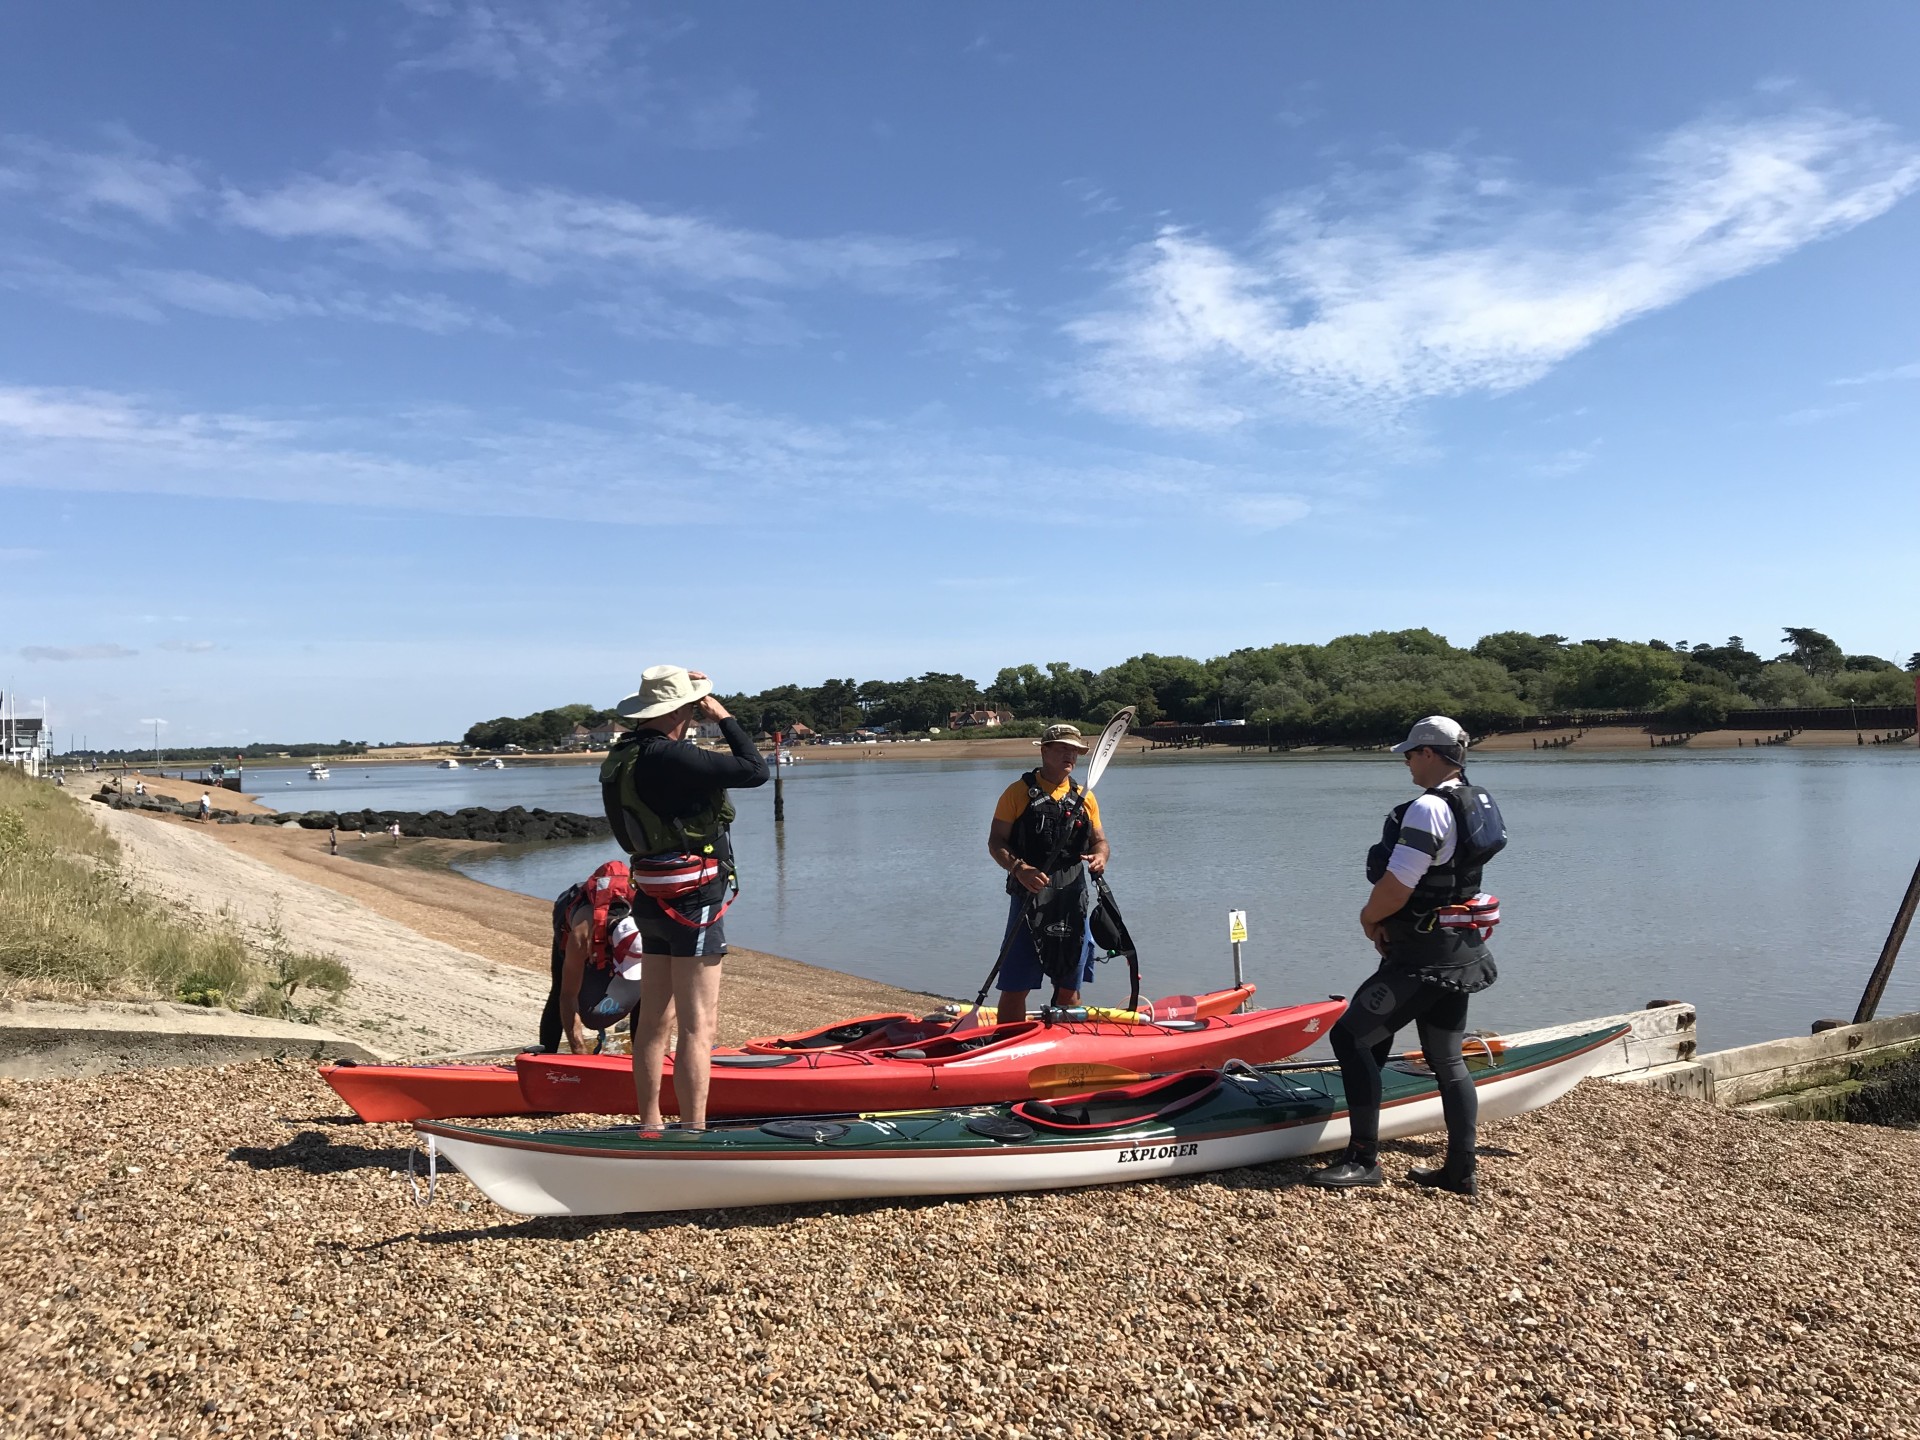 Sea kayakers preparing to launch in to the Deben estuary with NOMAD Sea Kayaking.